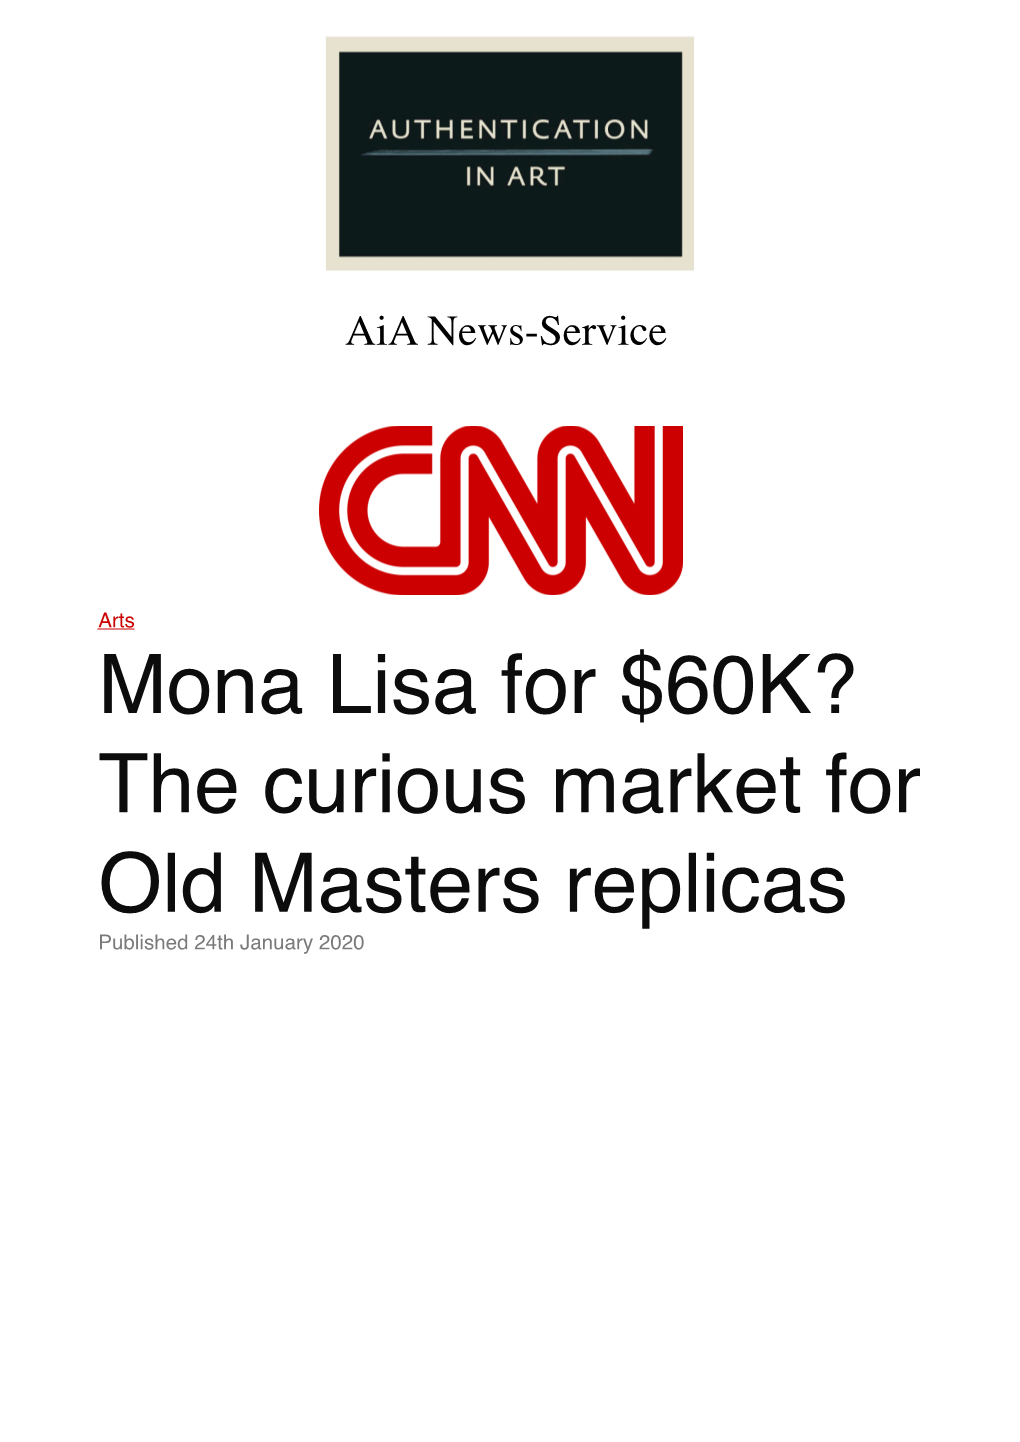 Mona Lisa for $60K? the Curious Market for Old Masters Replicas -CNN